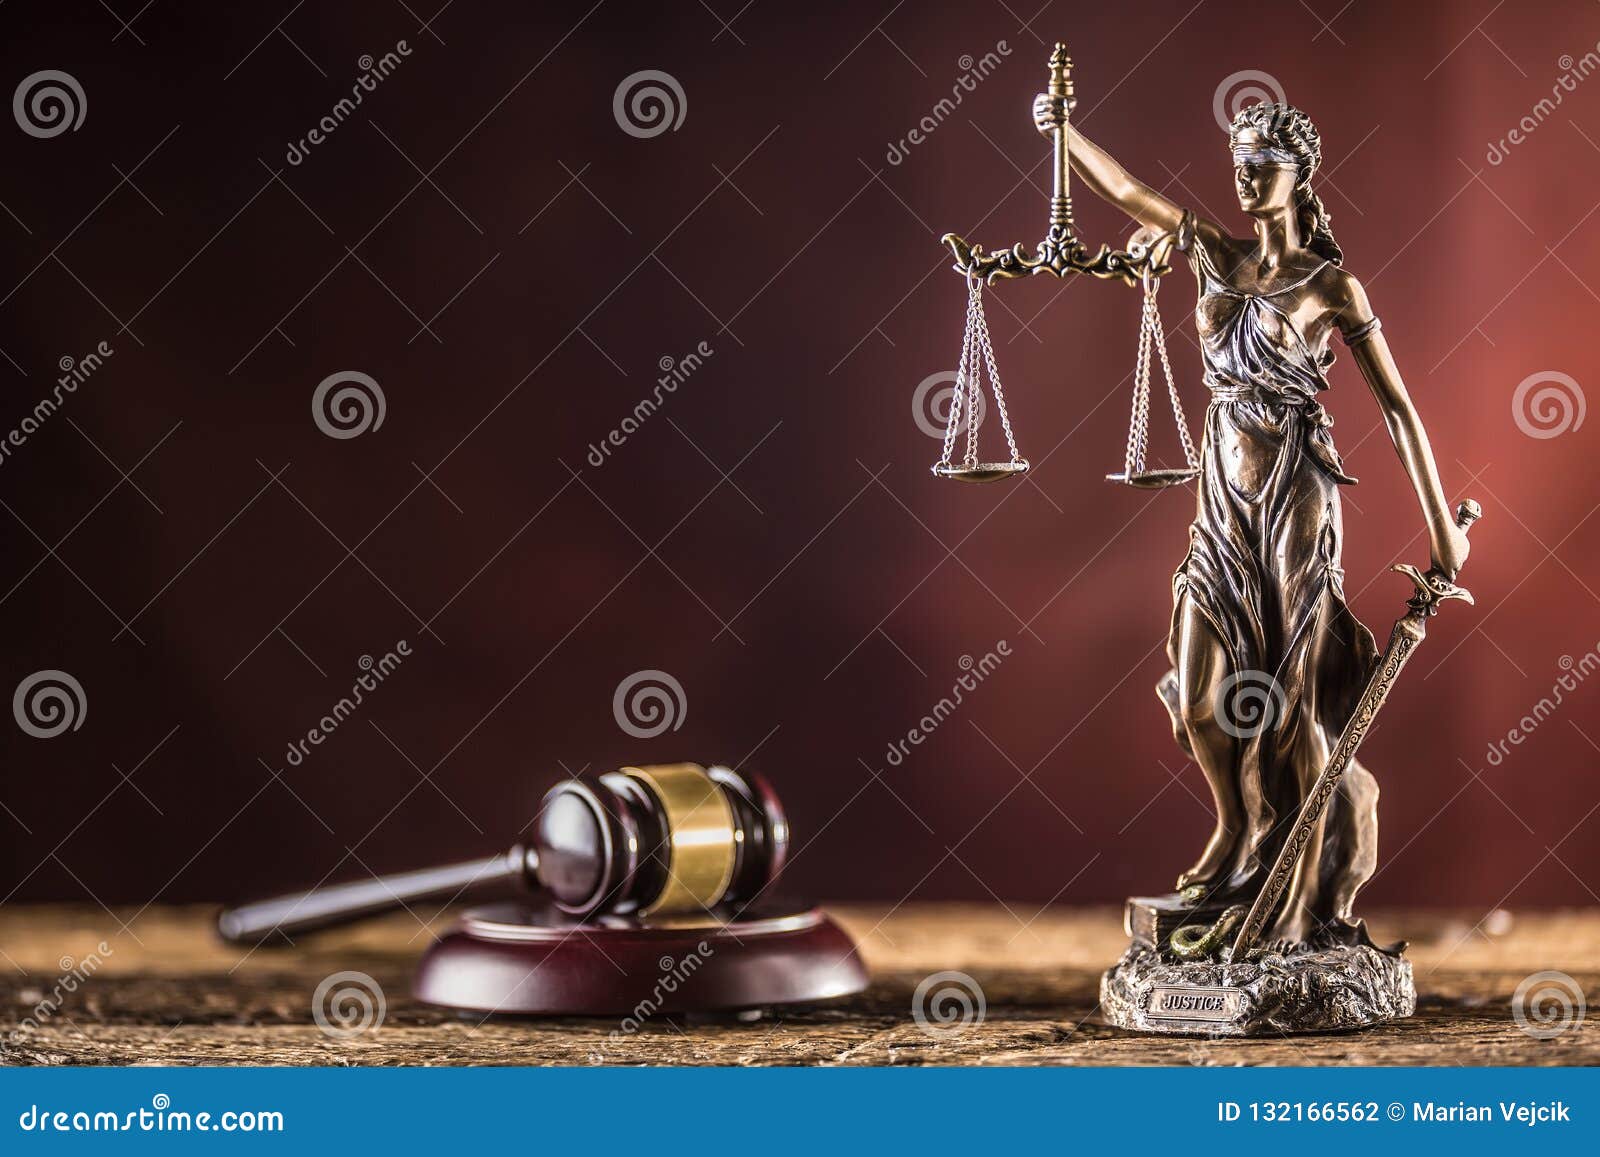 lady justicia holding sword and scale bronze figurine with judge